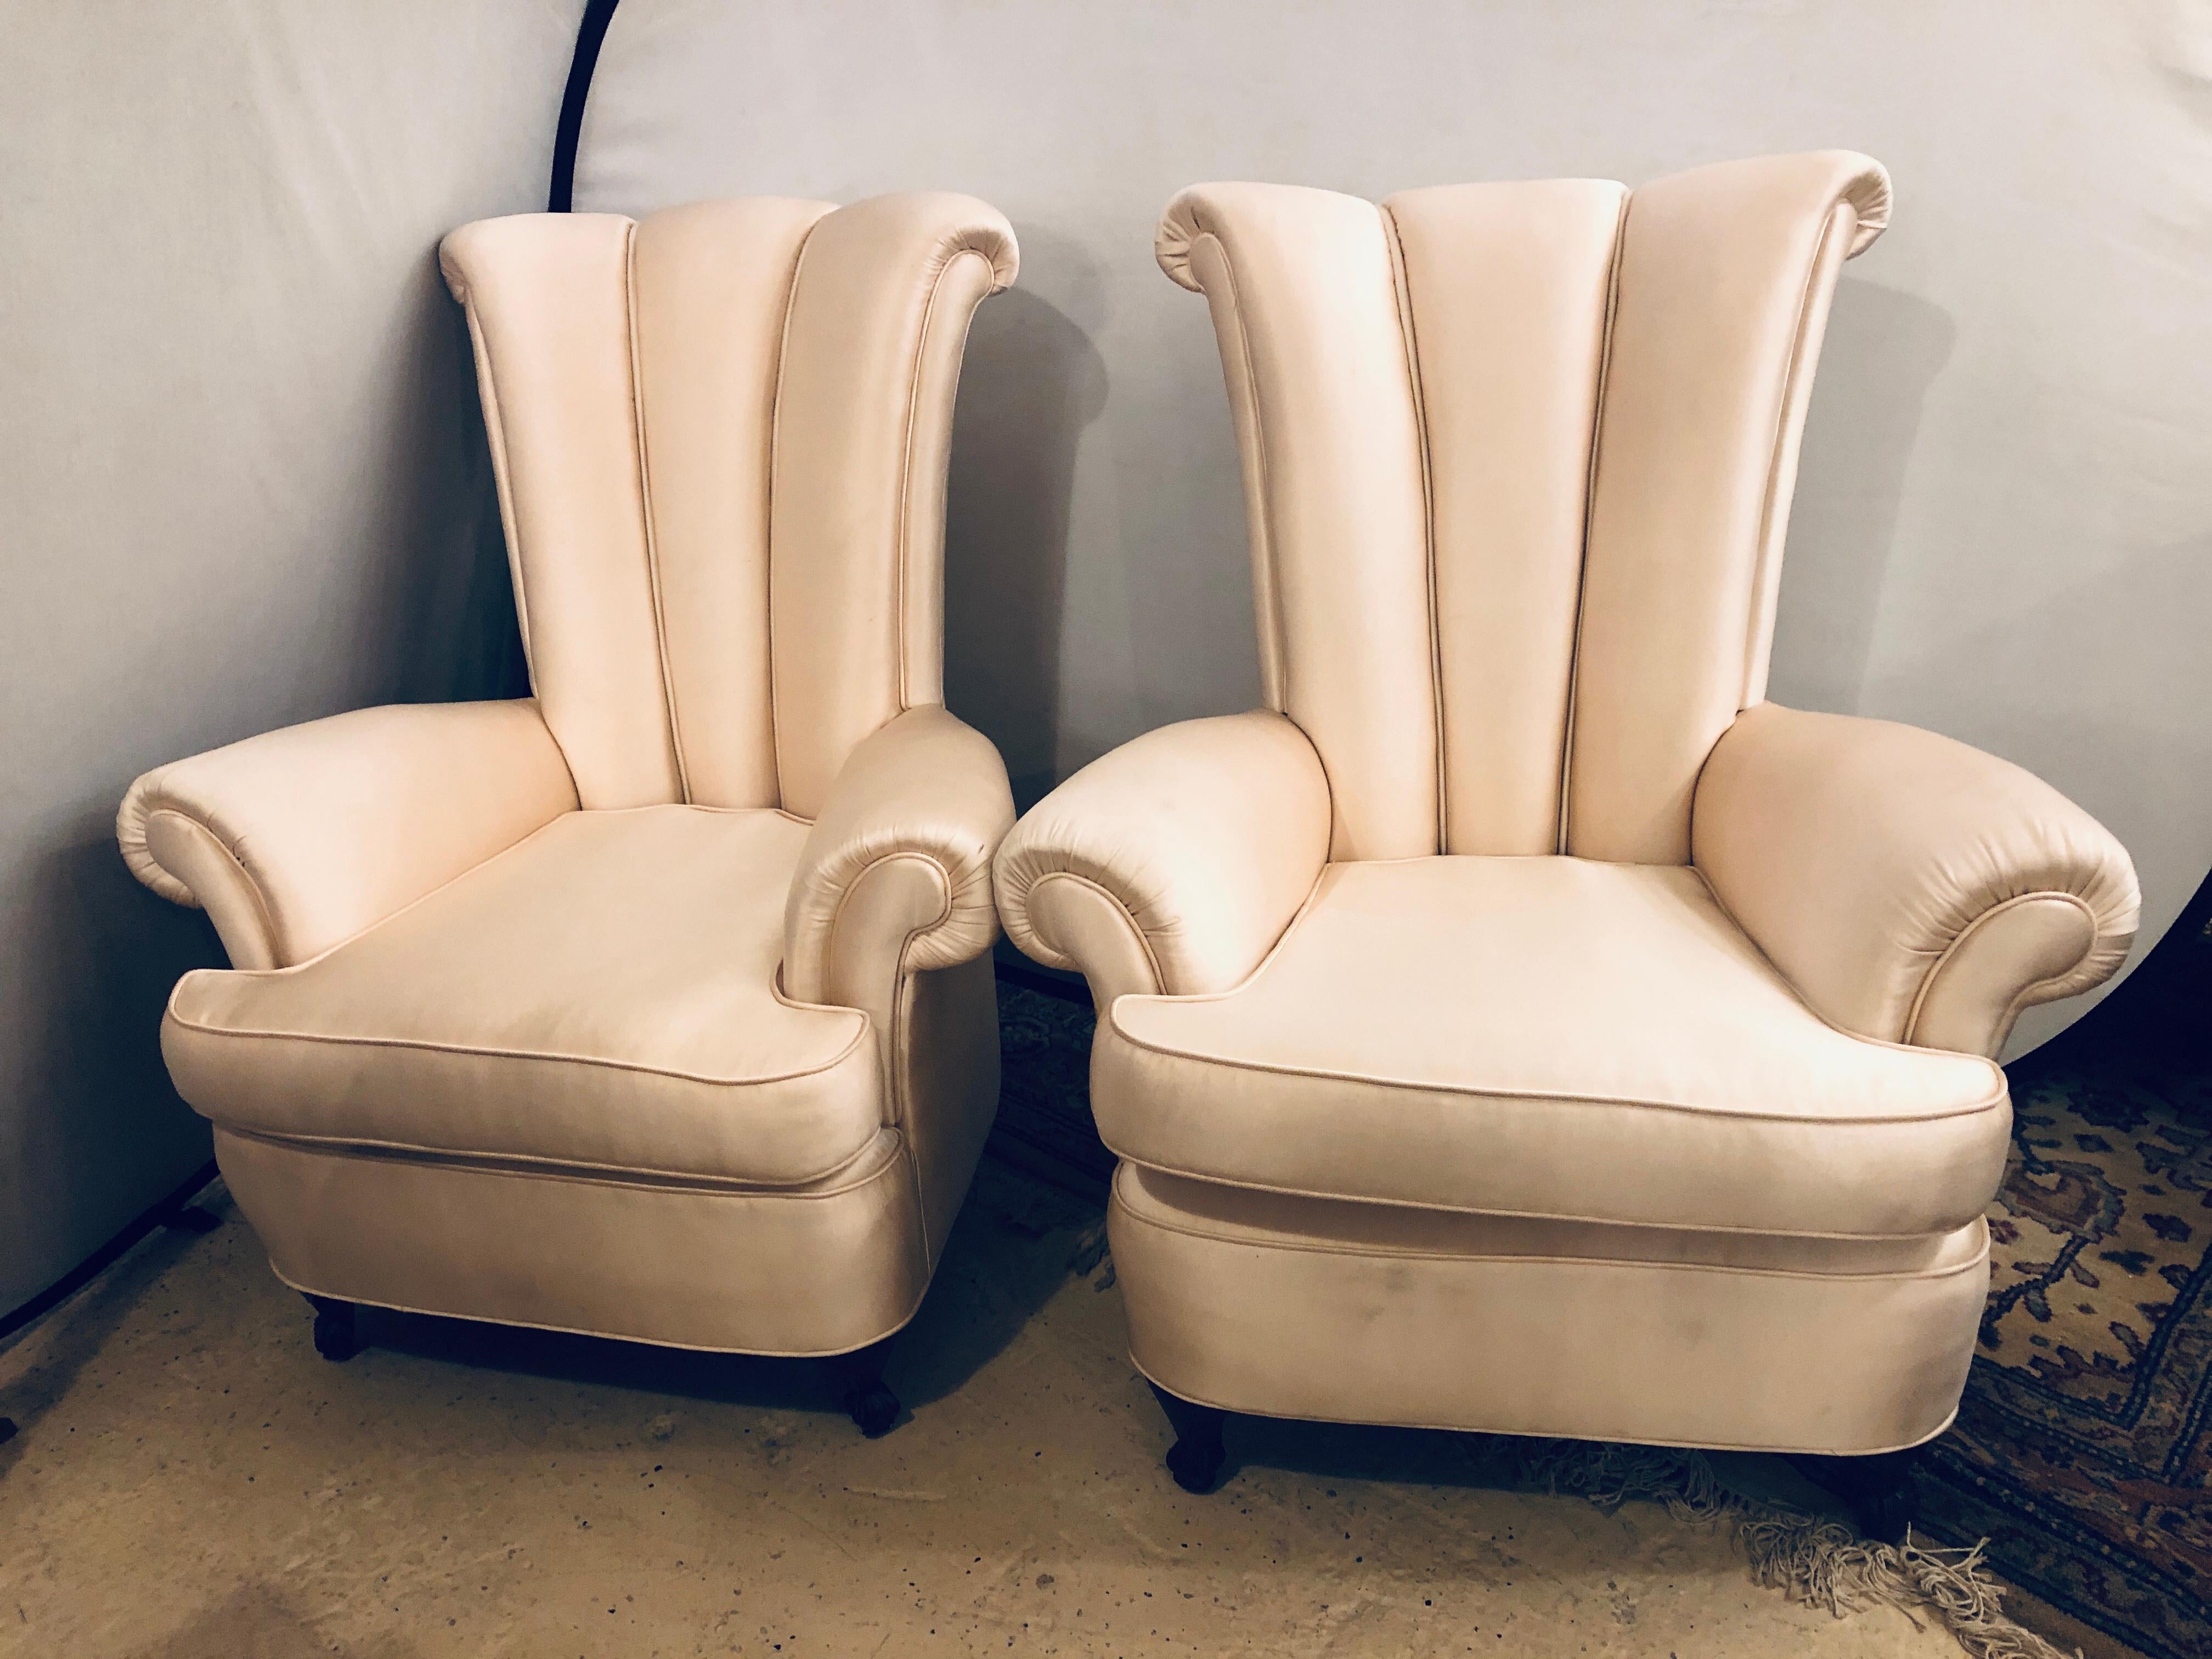 Pair of Hollywood Regency style channel high back chairs each supported by a mahogany short leg. Sleek and Stylish are these finely upholstered armchairs in a linen or silk upholstery. Chair upholstery needs a good cleaning. 